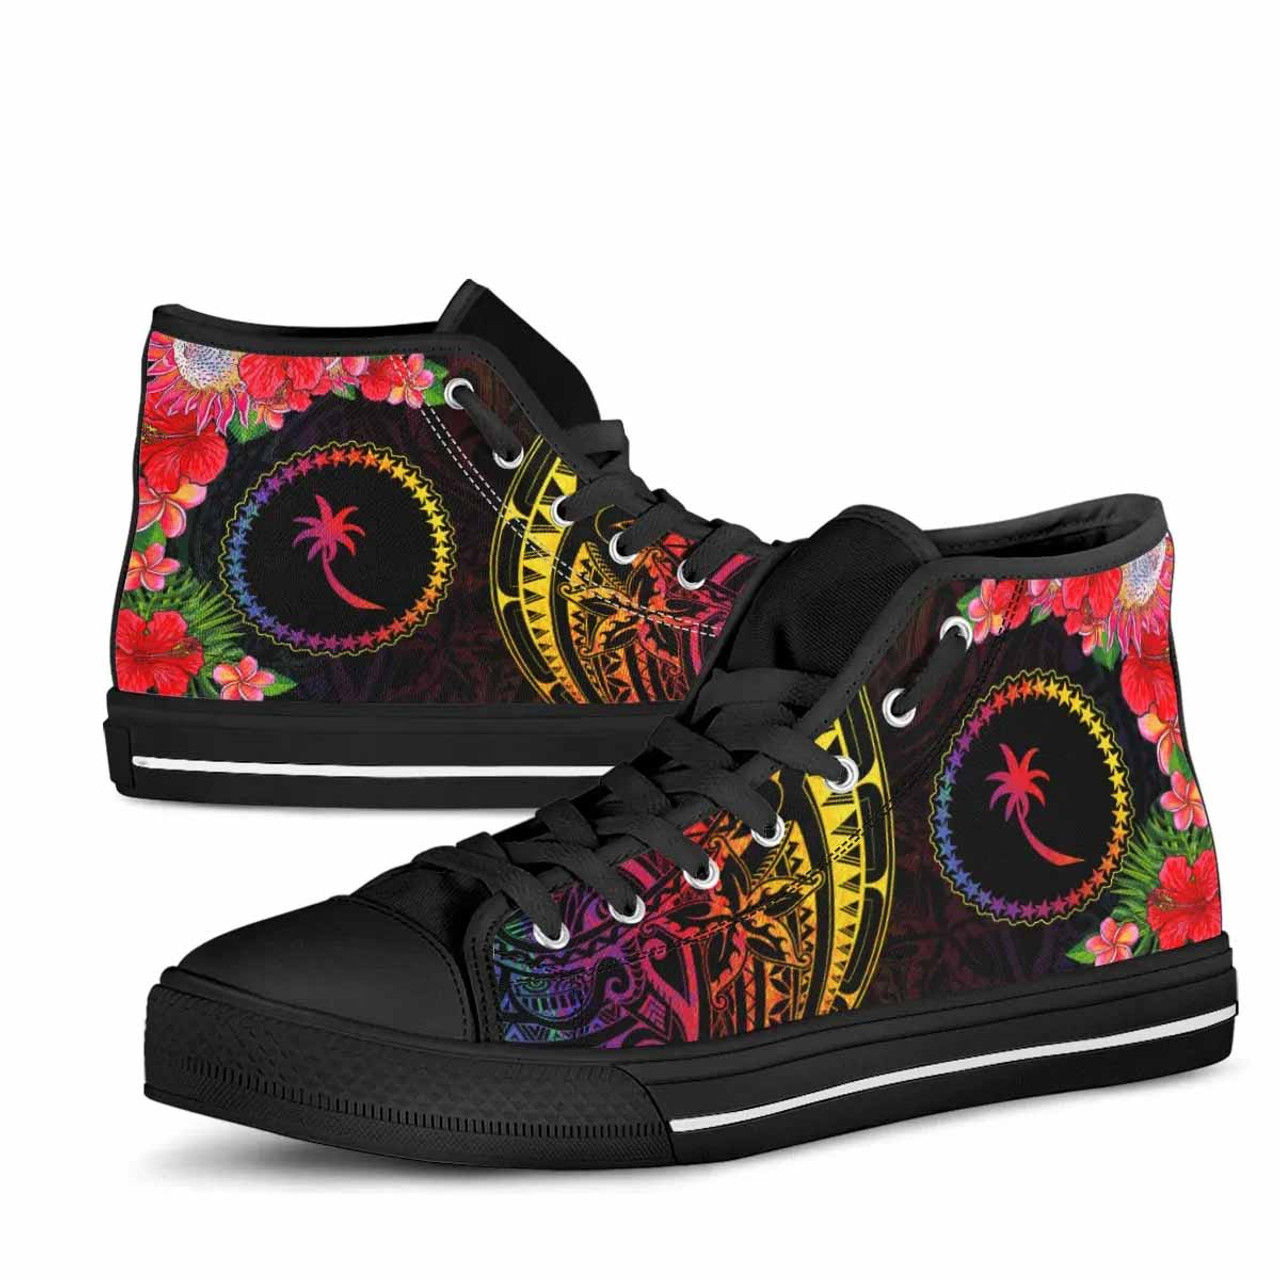 Chuuk State High Top Shoes - Tropical Hippie Style 4